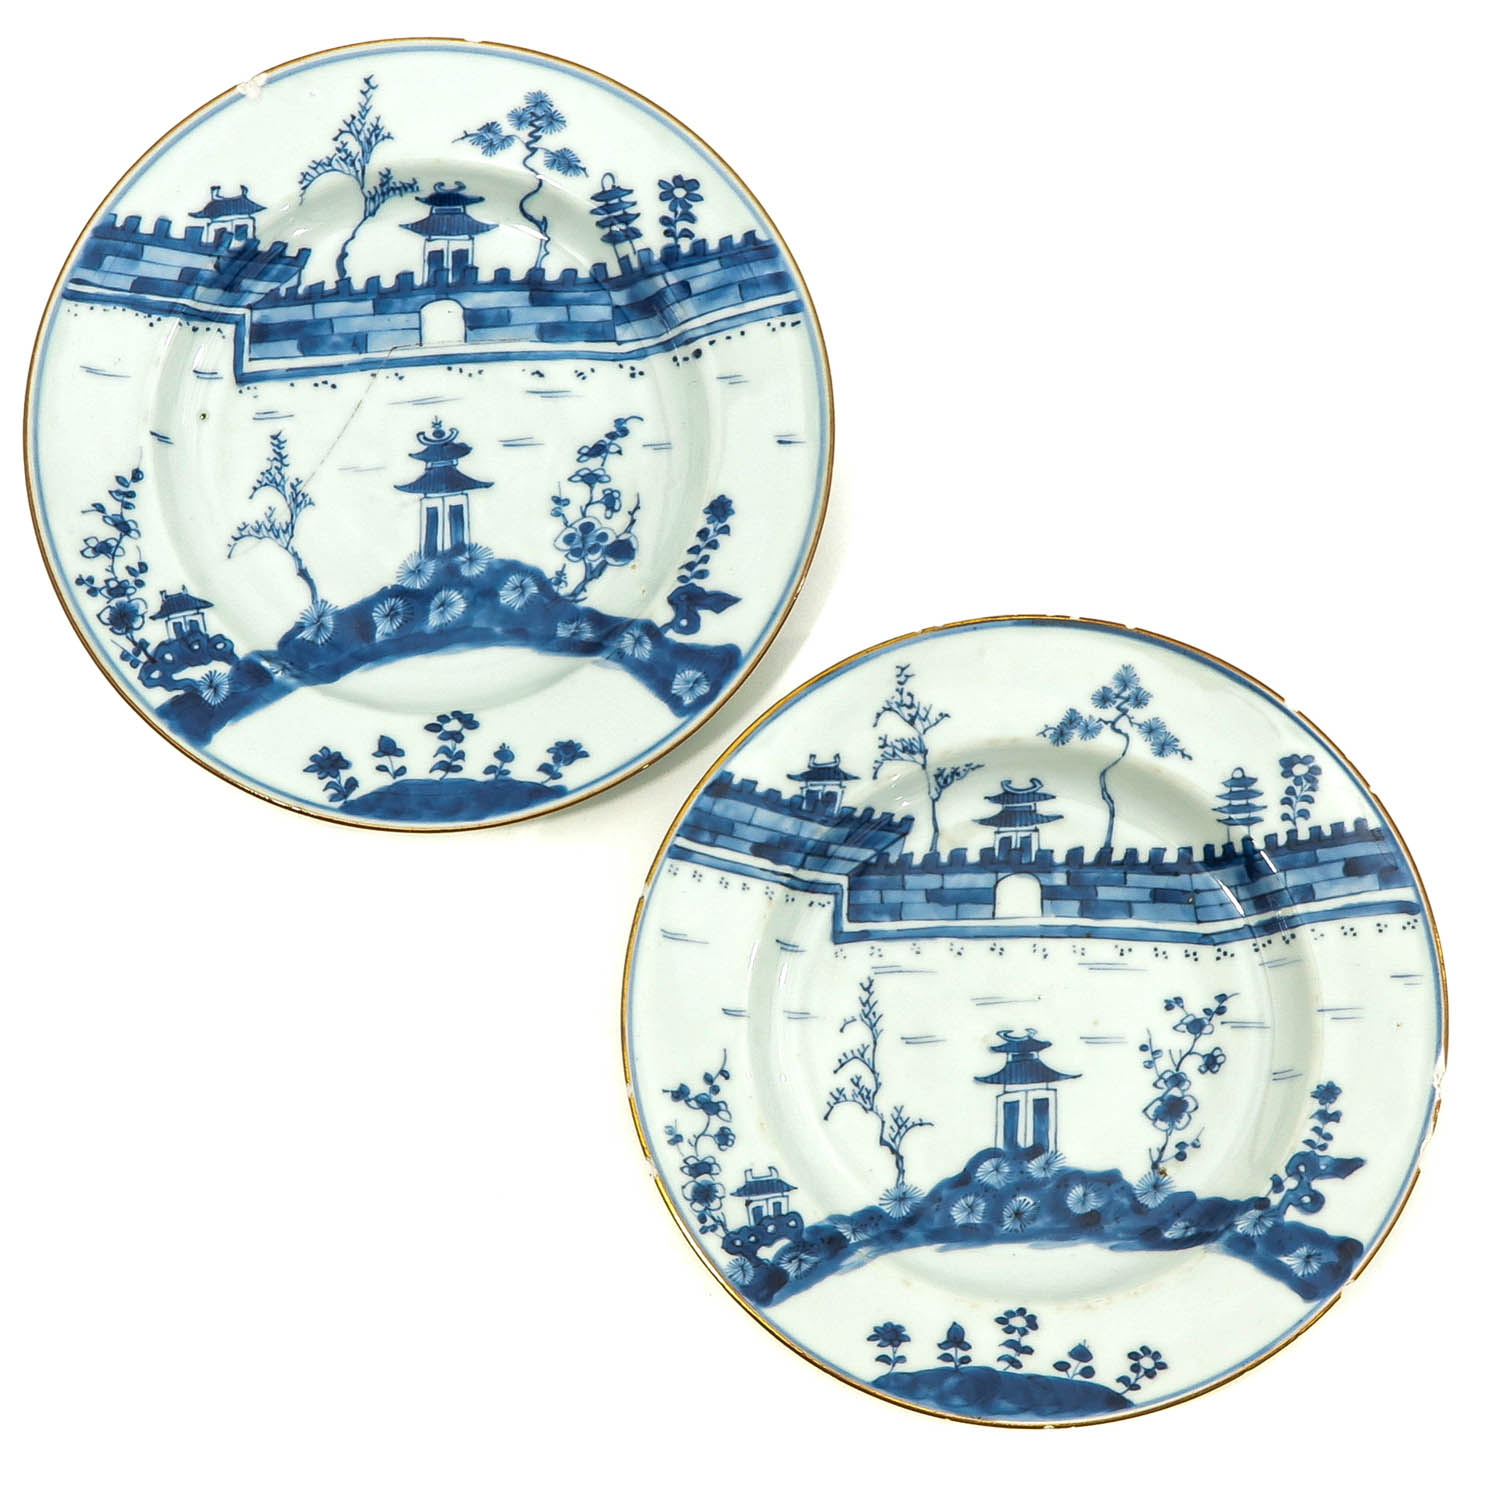 A Series of 5 Blue and White Plates - Image 3 of 10